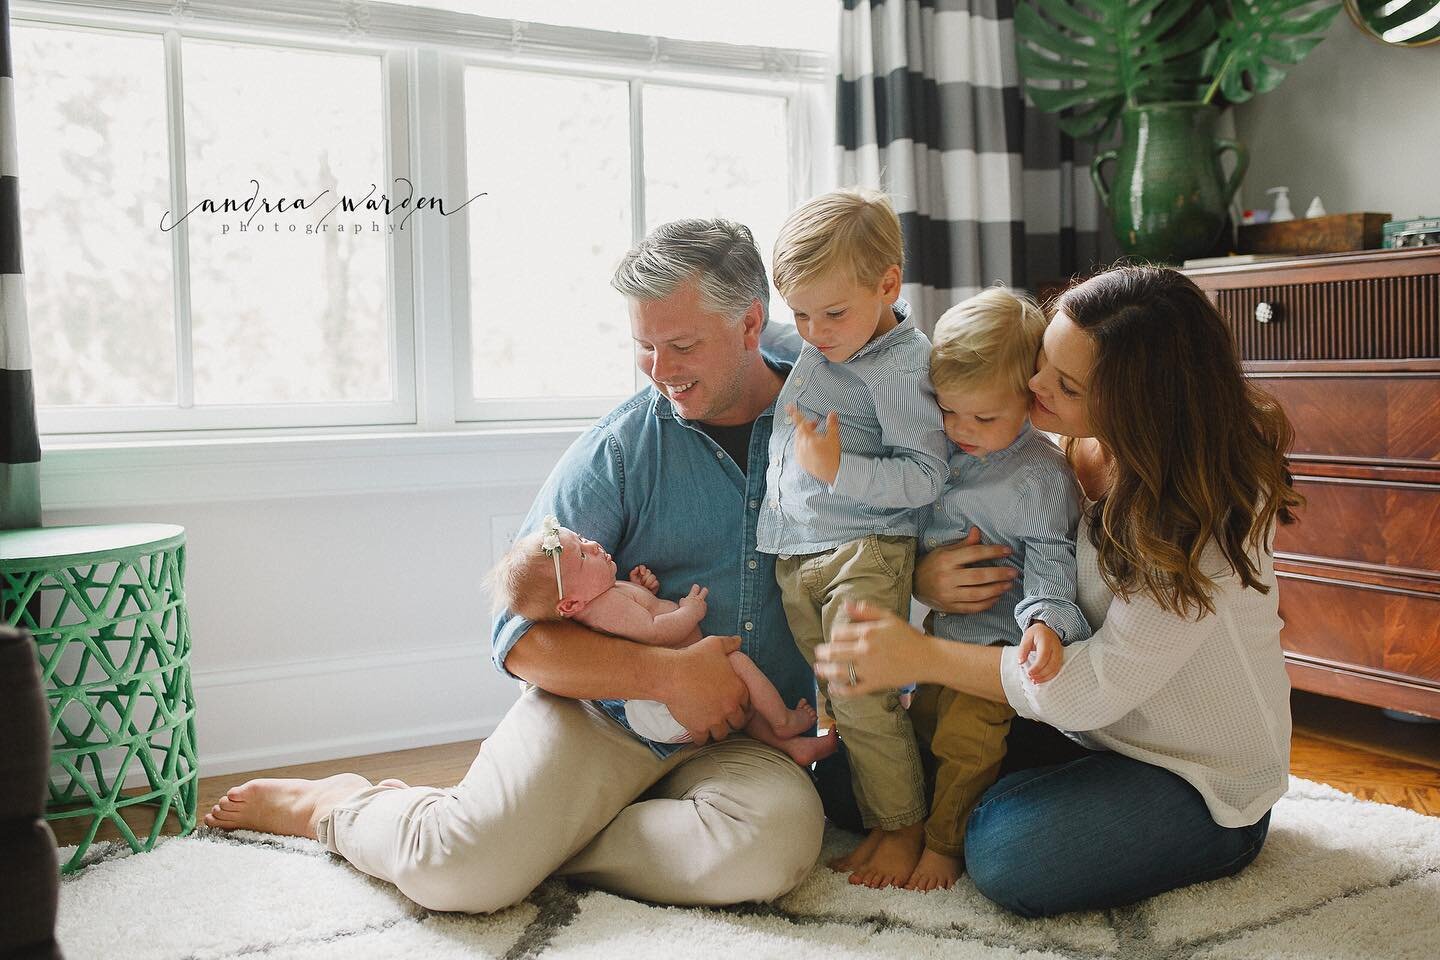 This crew is complete with their darling baby girl! Always a joy photographing this family 💗
.
.
.
.
#andreawardenphotography #philadelphianewbornphotographer #mainlinenewbornphotographer #newbornphotography #newbornphotographer #chestercountynewbor